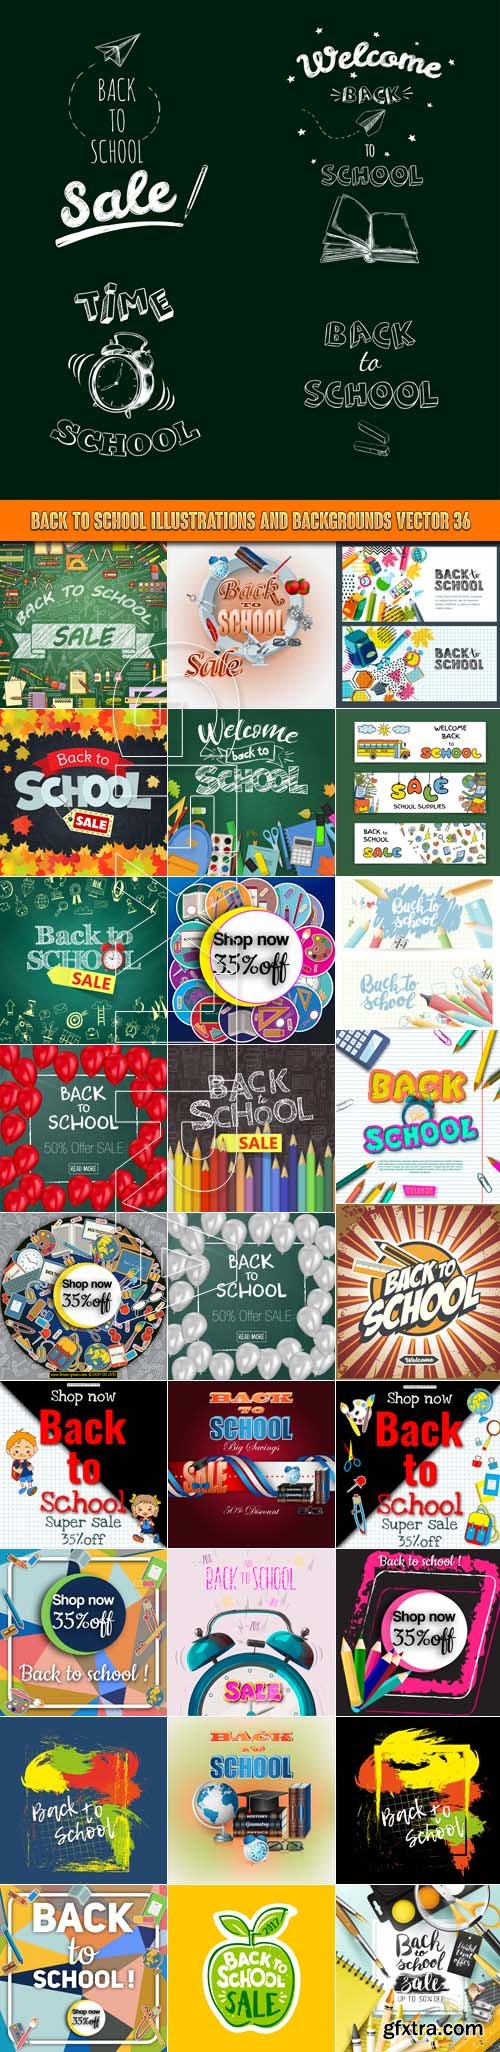 Back to school illustrations and backgrounds vector 36